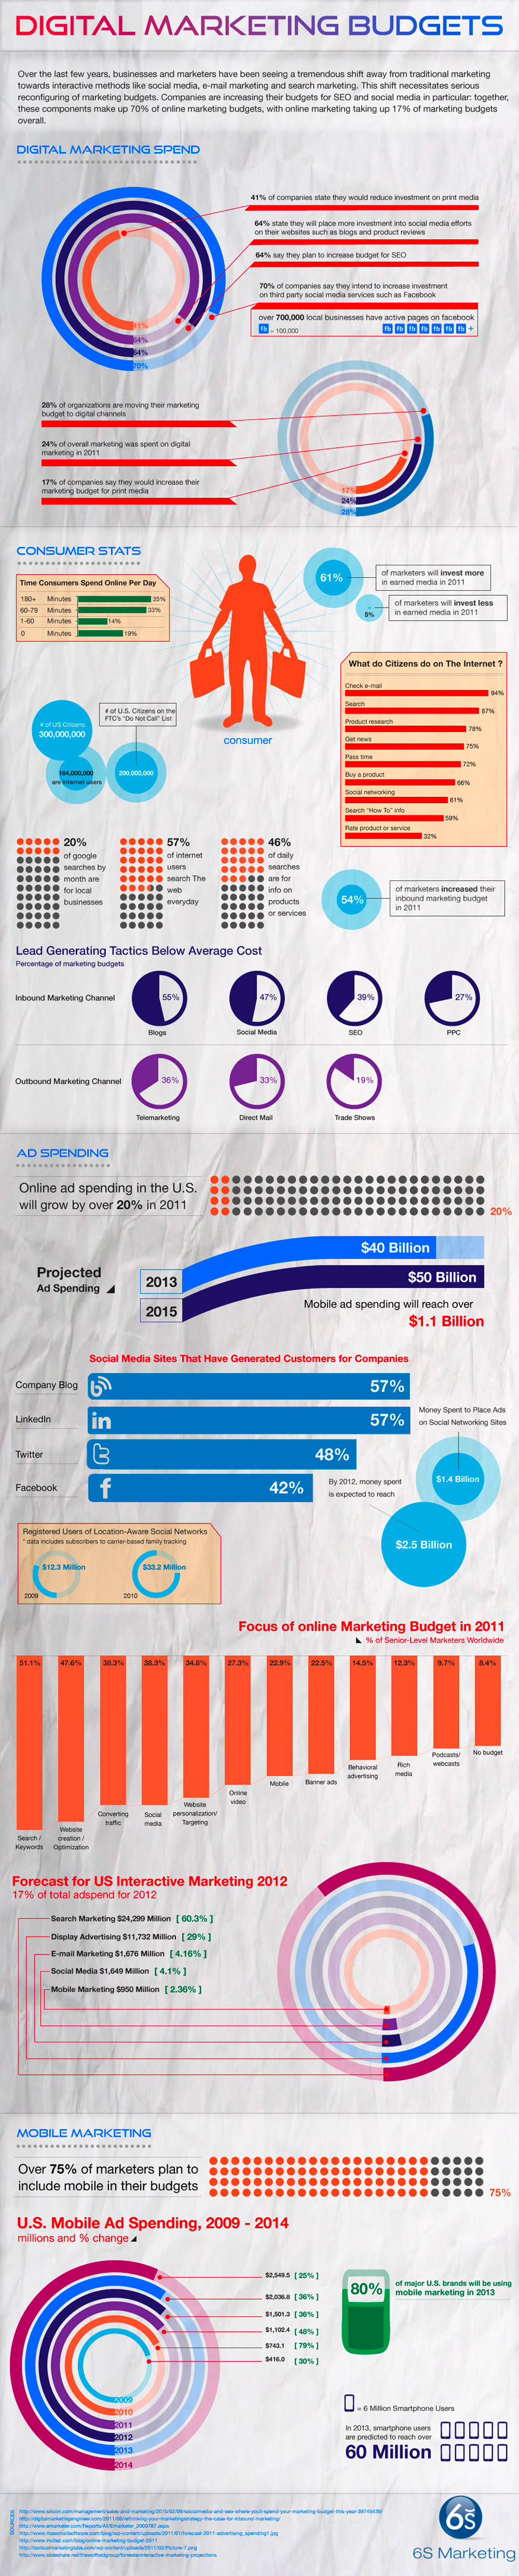 Infographic about digital marketing budget trends